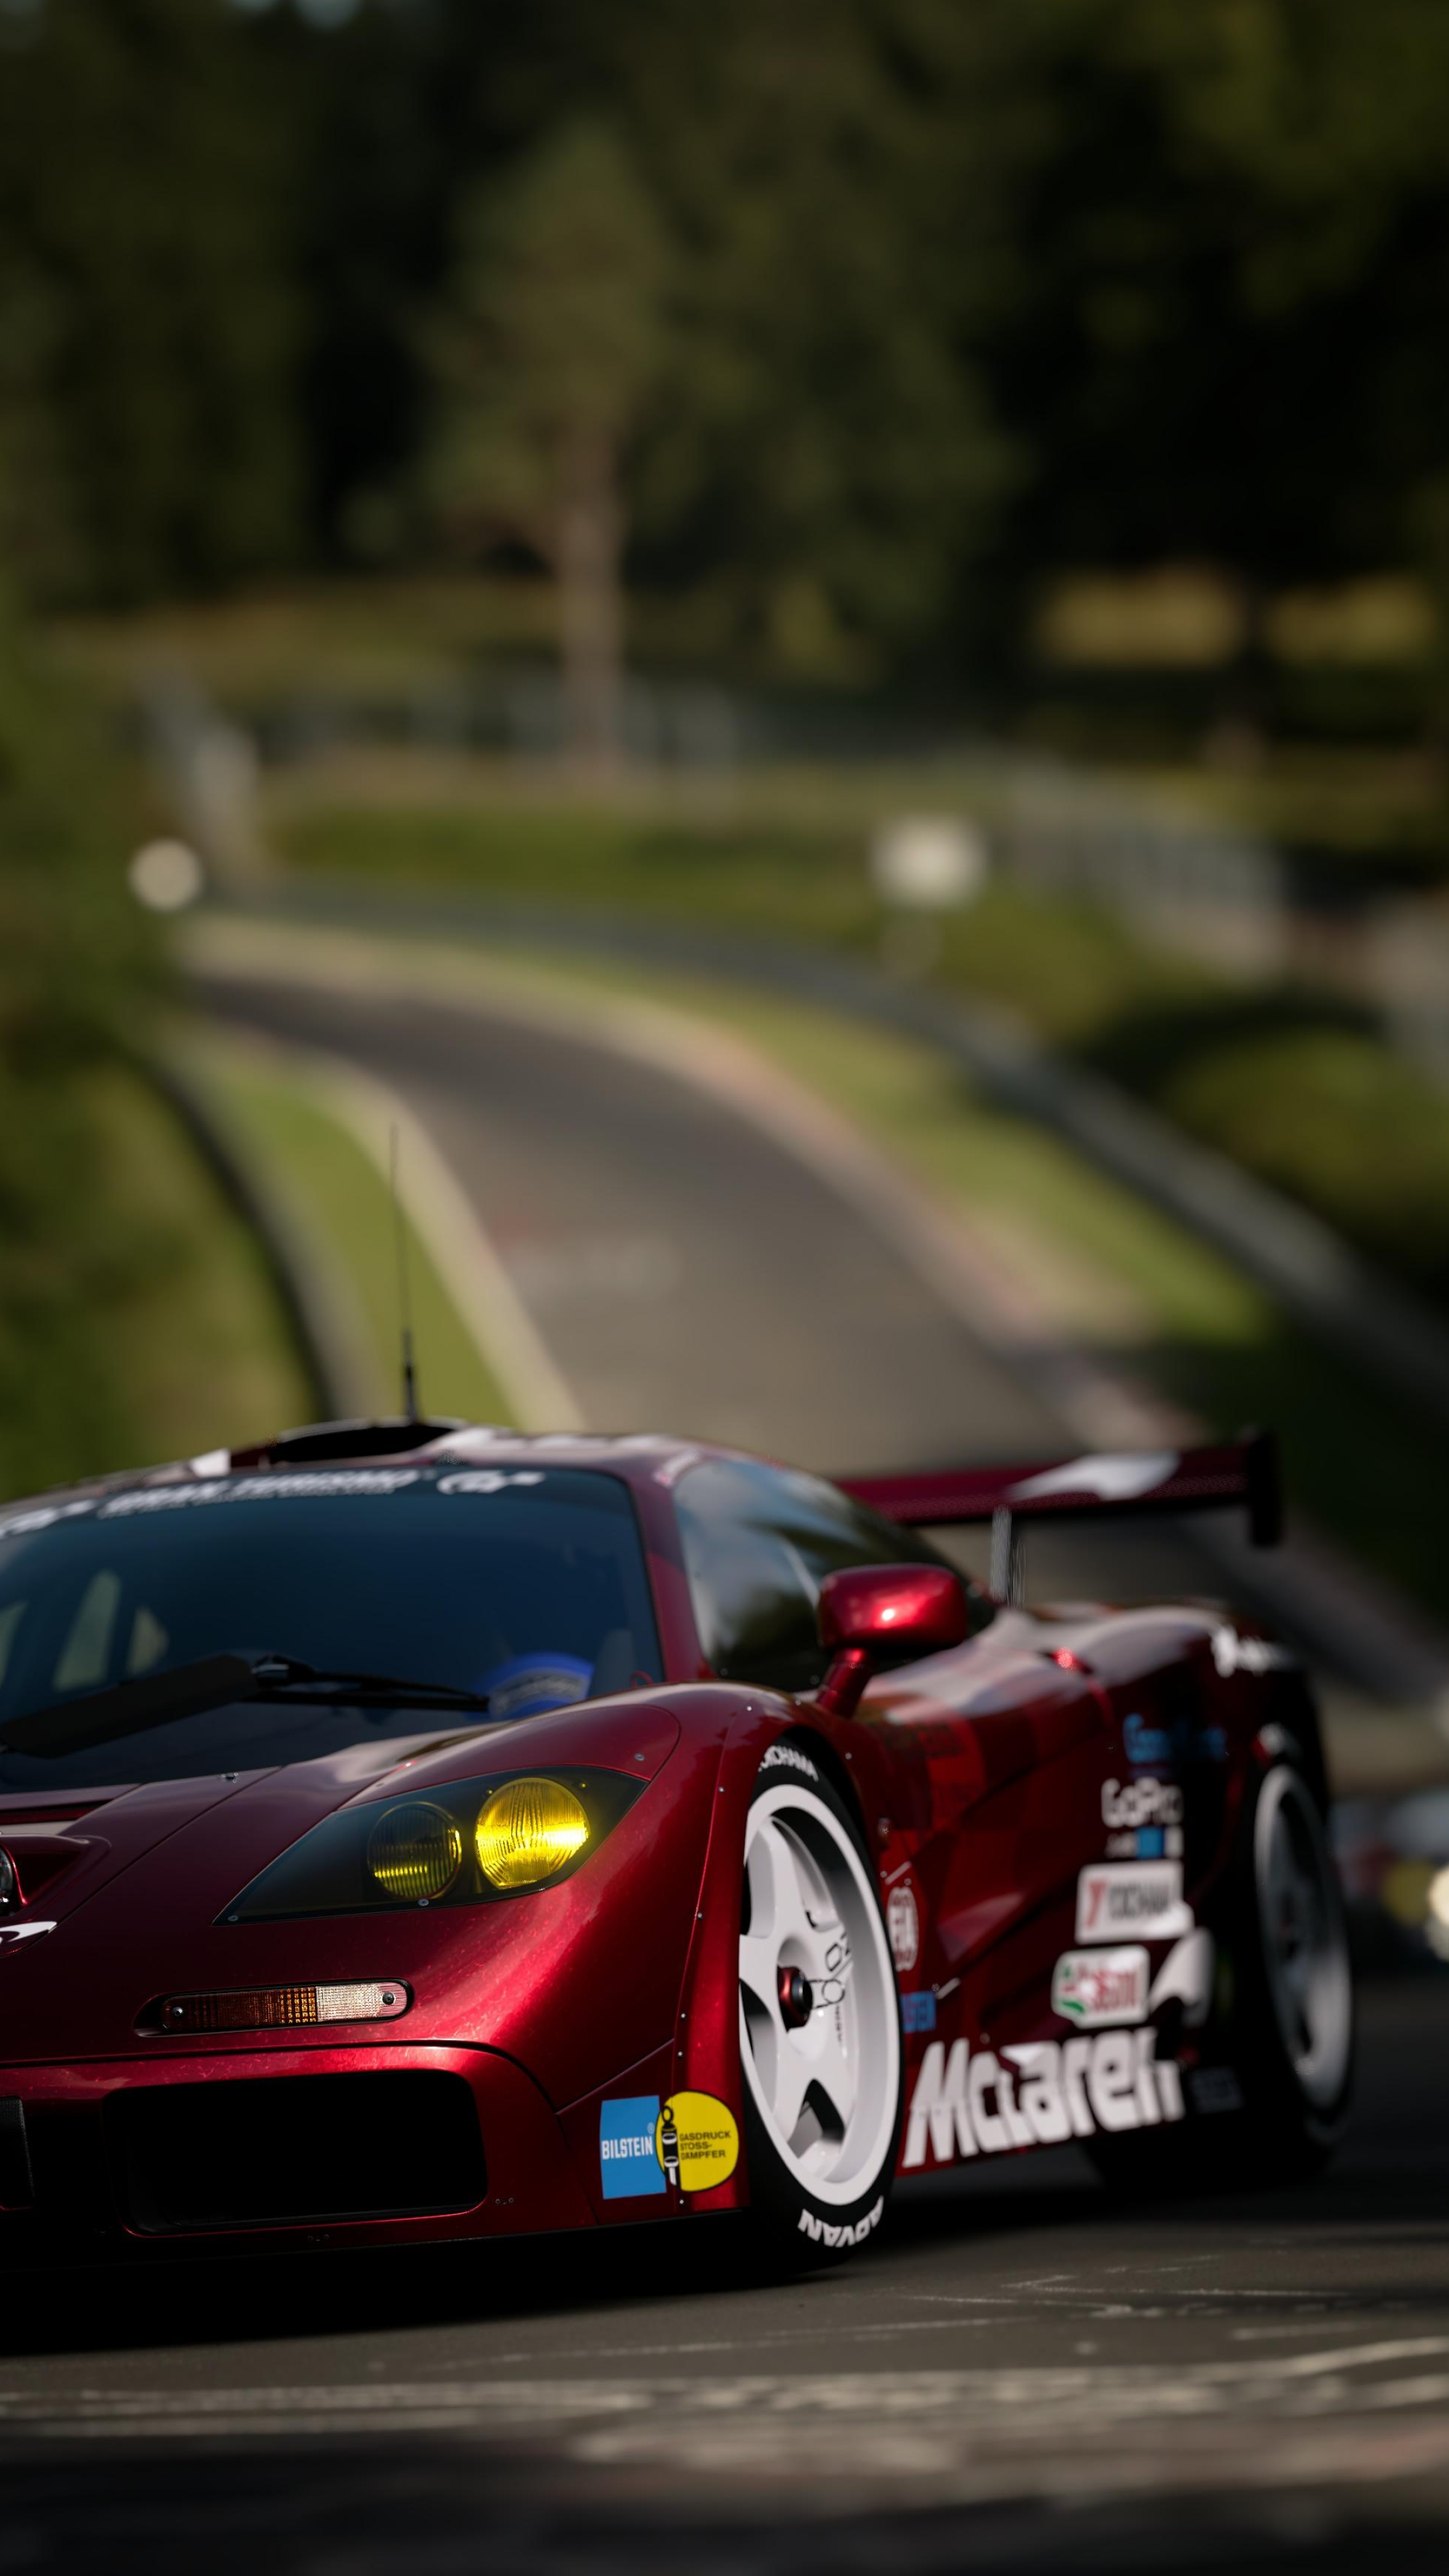 Motorsports: McLaren F1, A tuned version of the world's fastest production car. 2160x3840 4K Wallpaper.